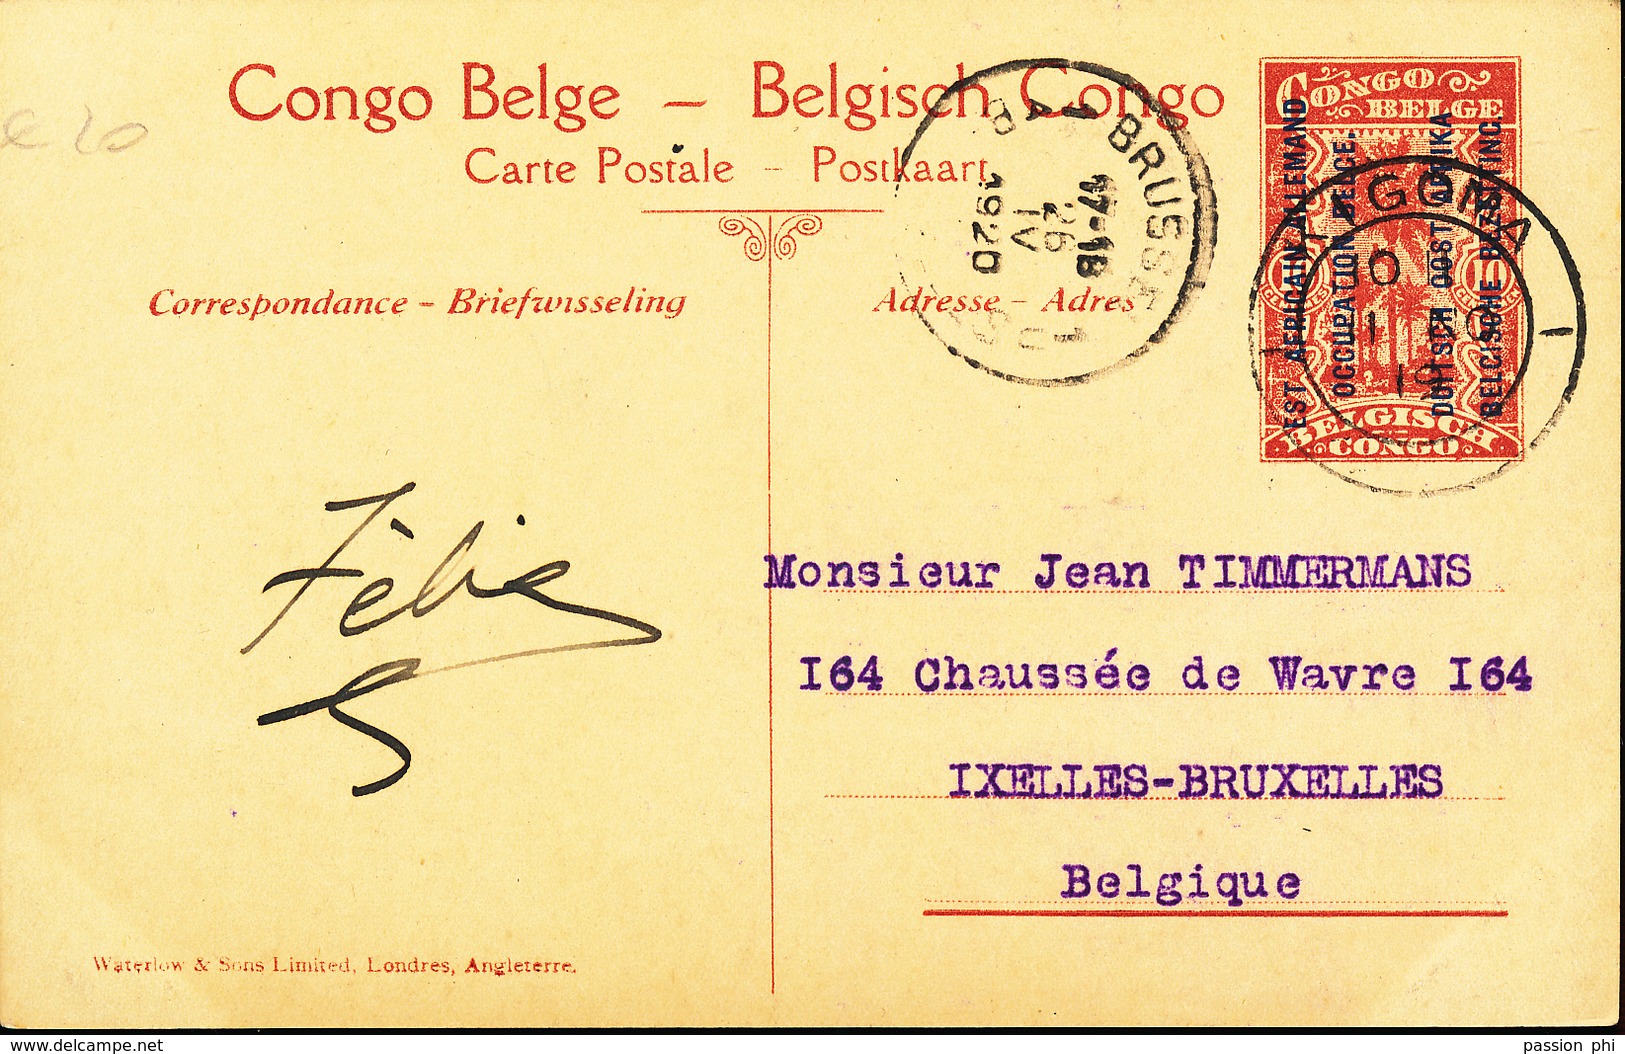 GEA RUANDA URUNDI 1918 ISSUE PPS STIBBE 12 VIEW 19 USED FROM KIGOMA TO BRUSSELS - Ganzsachen